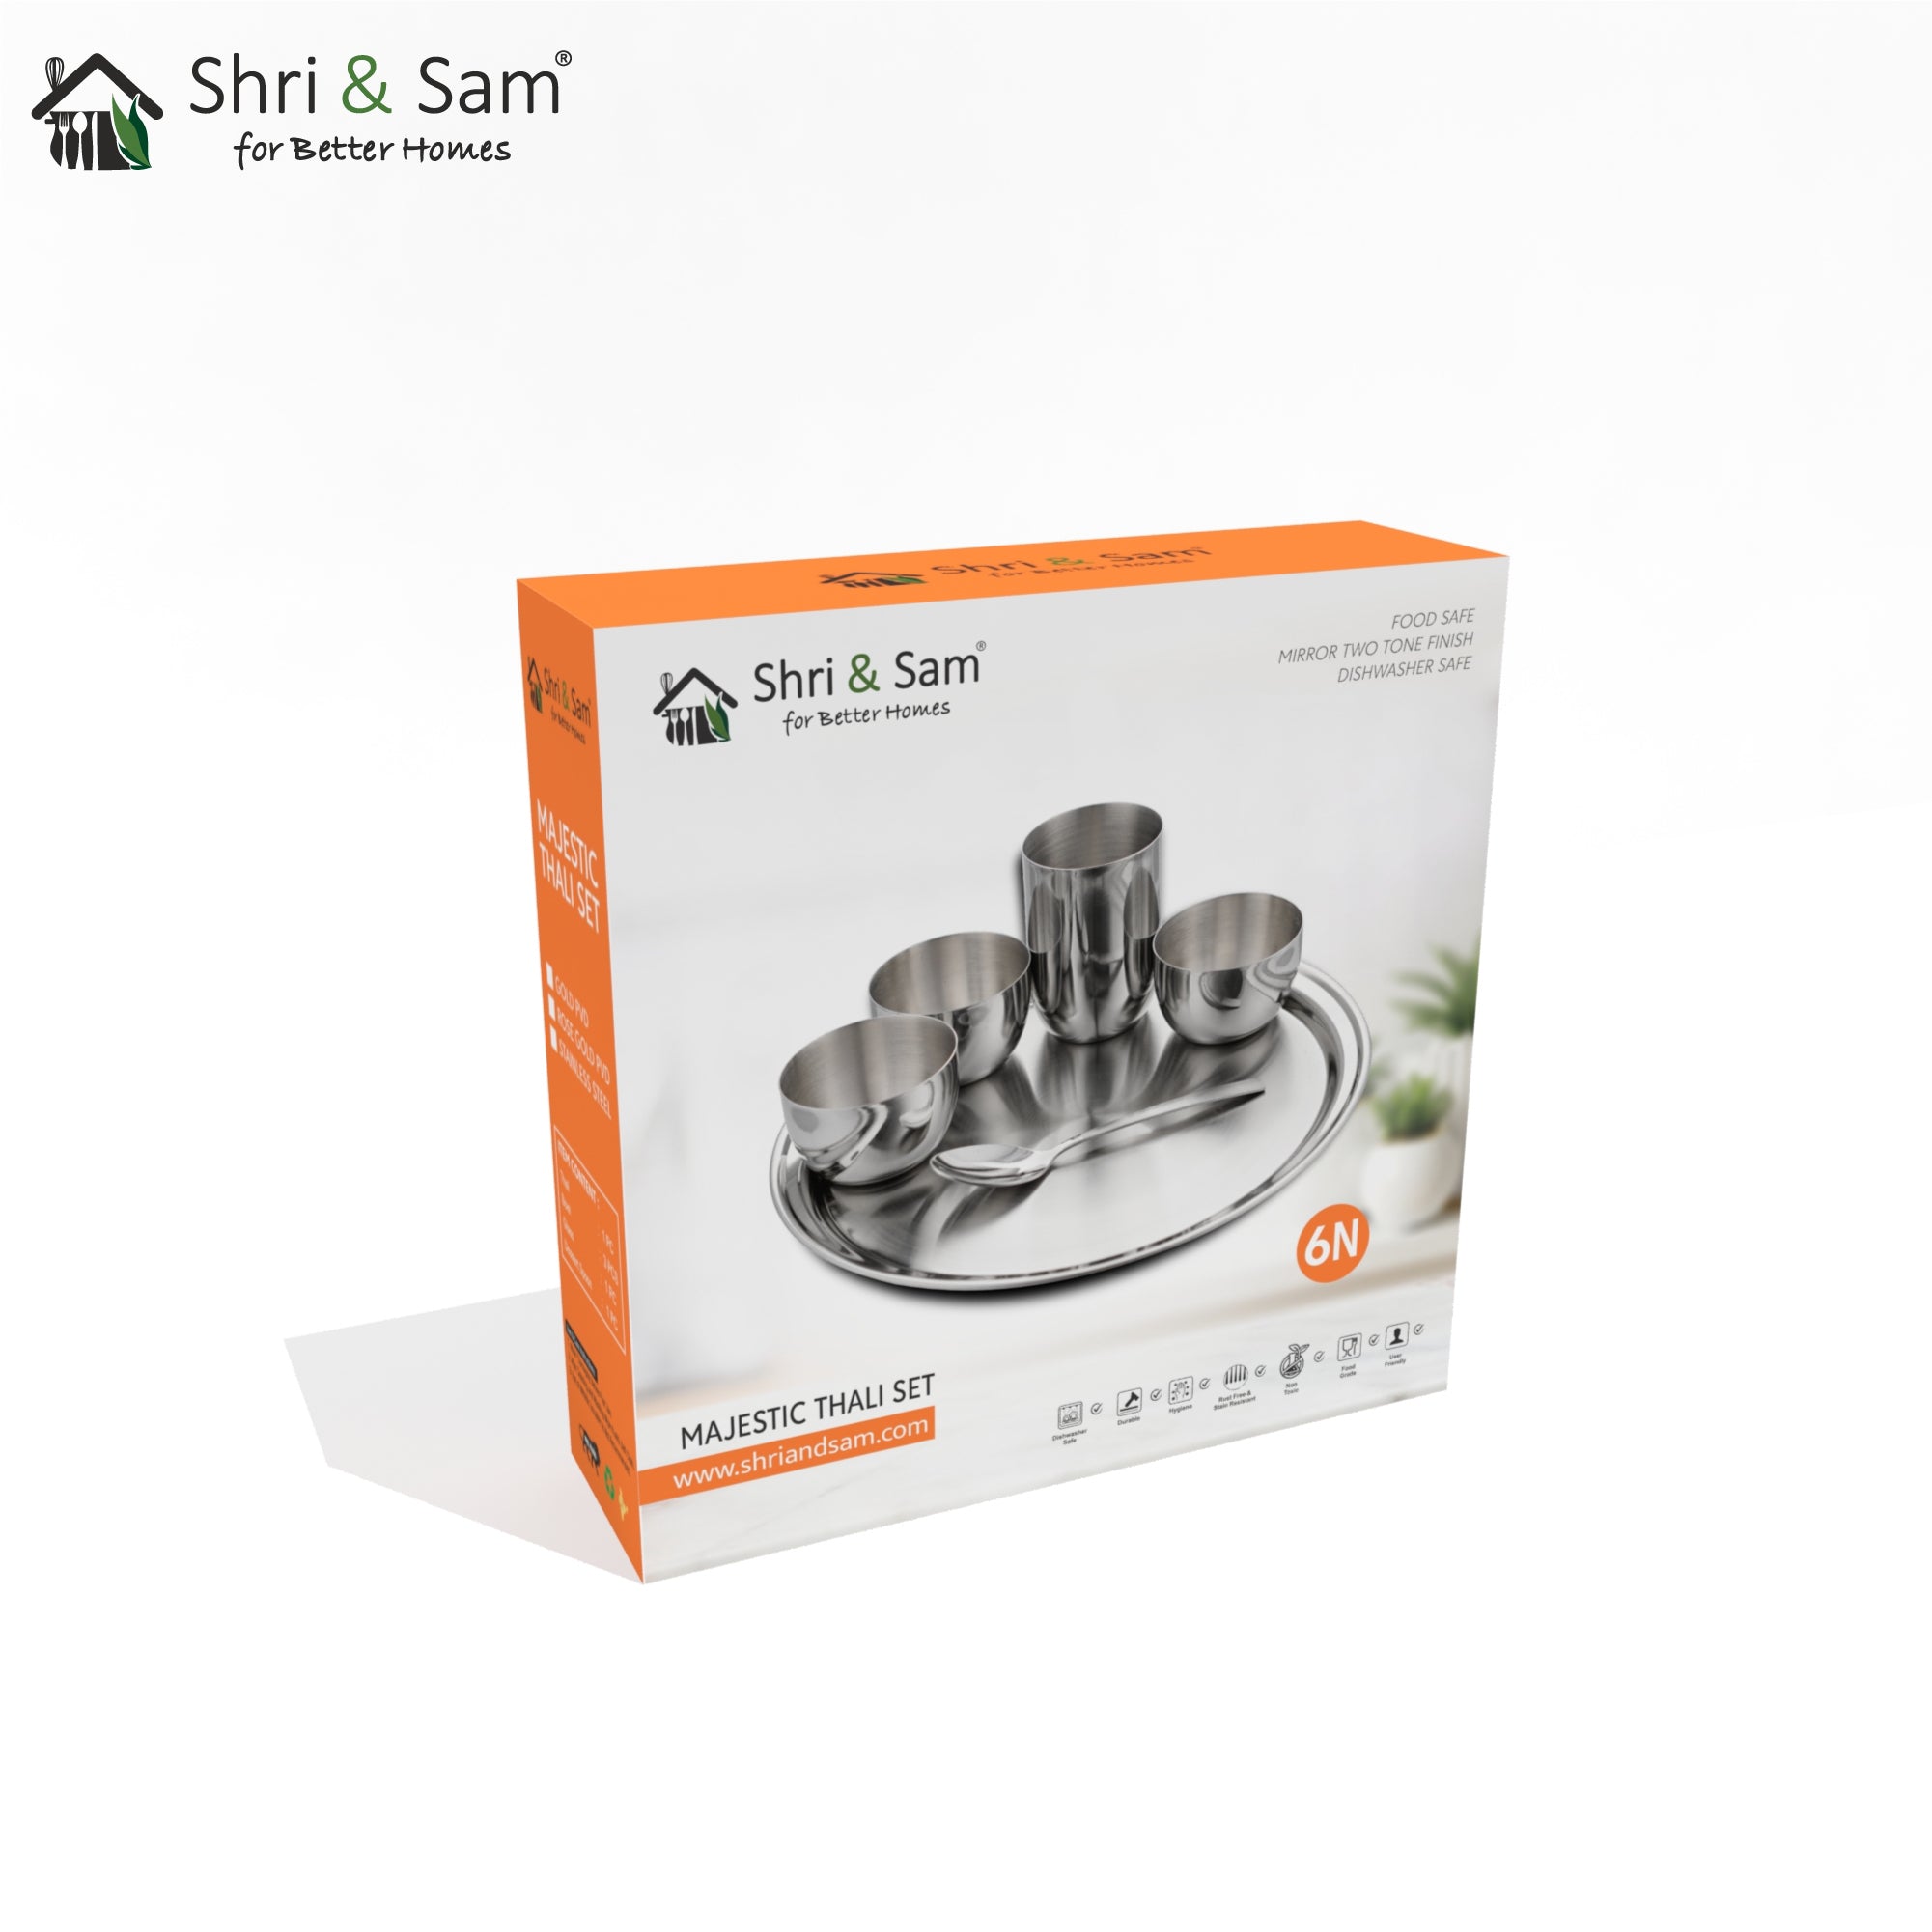 Stainless Steel Thali Set Majestic